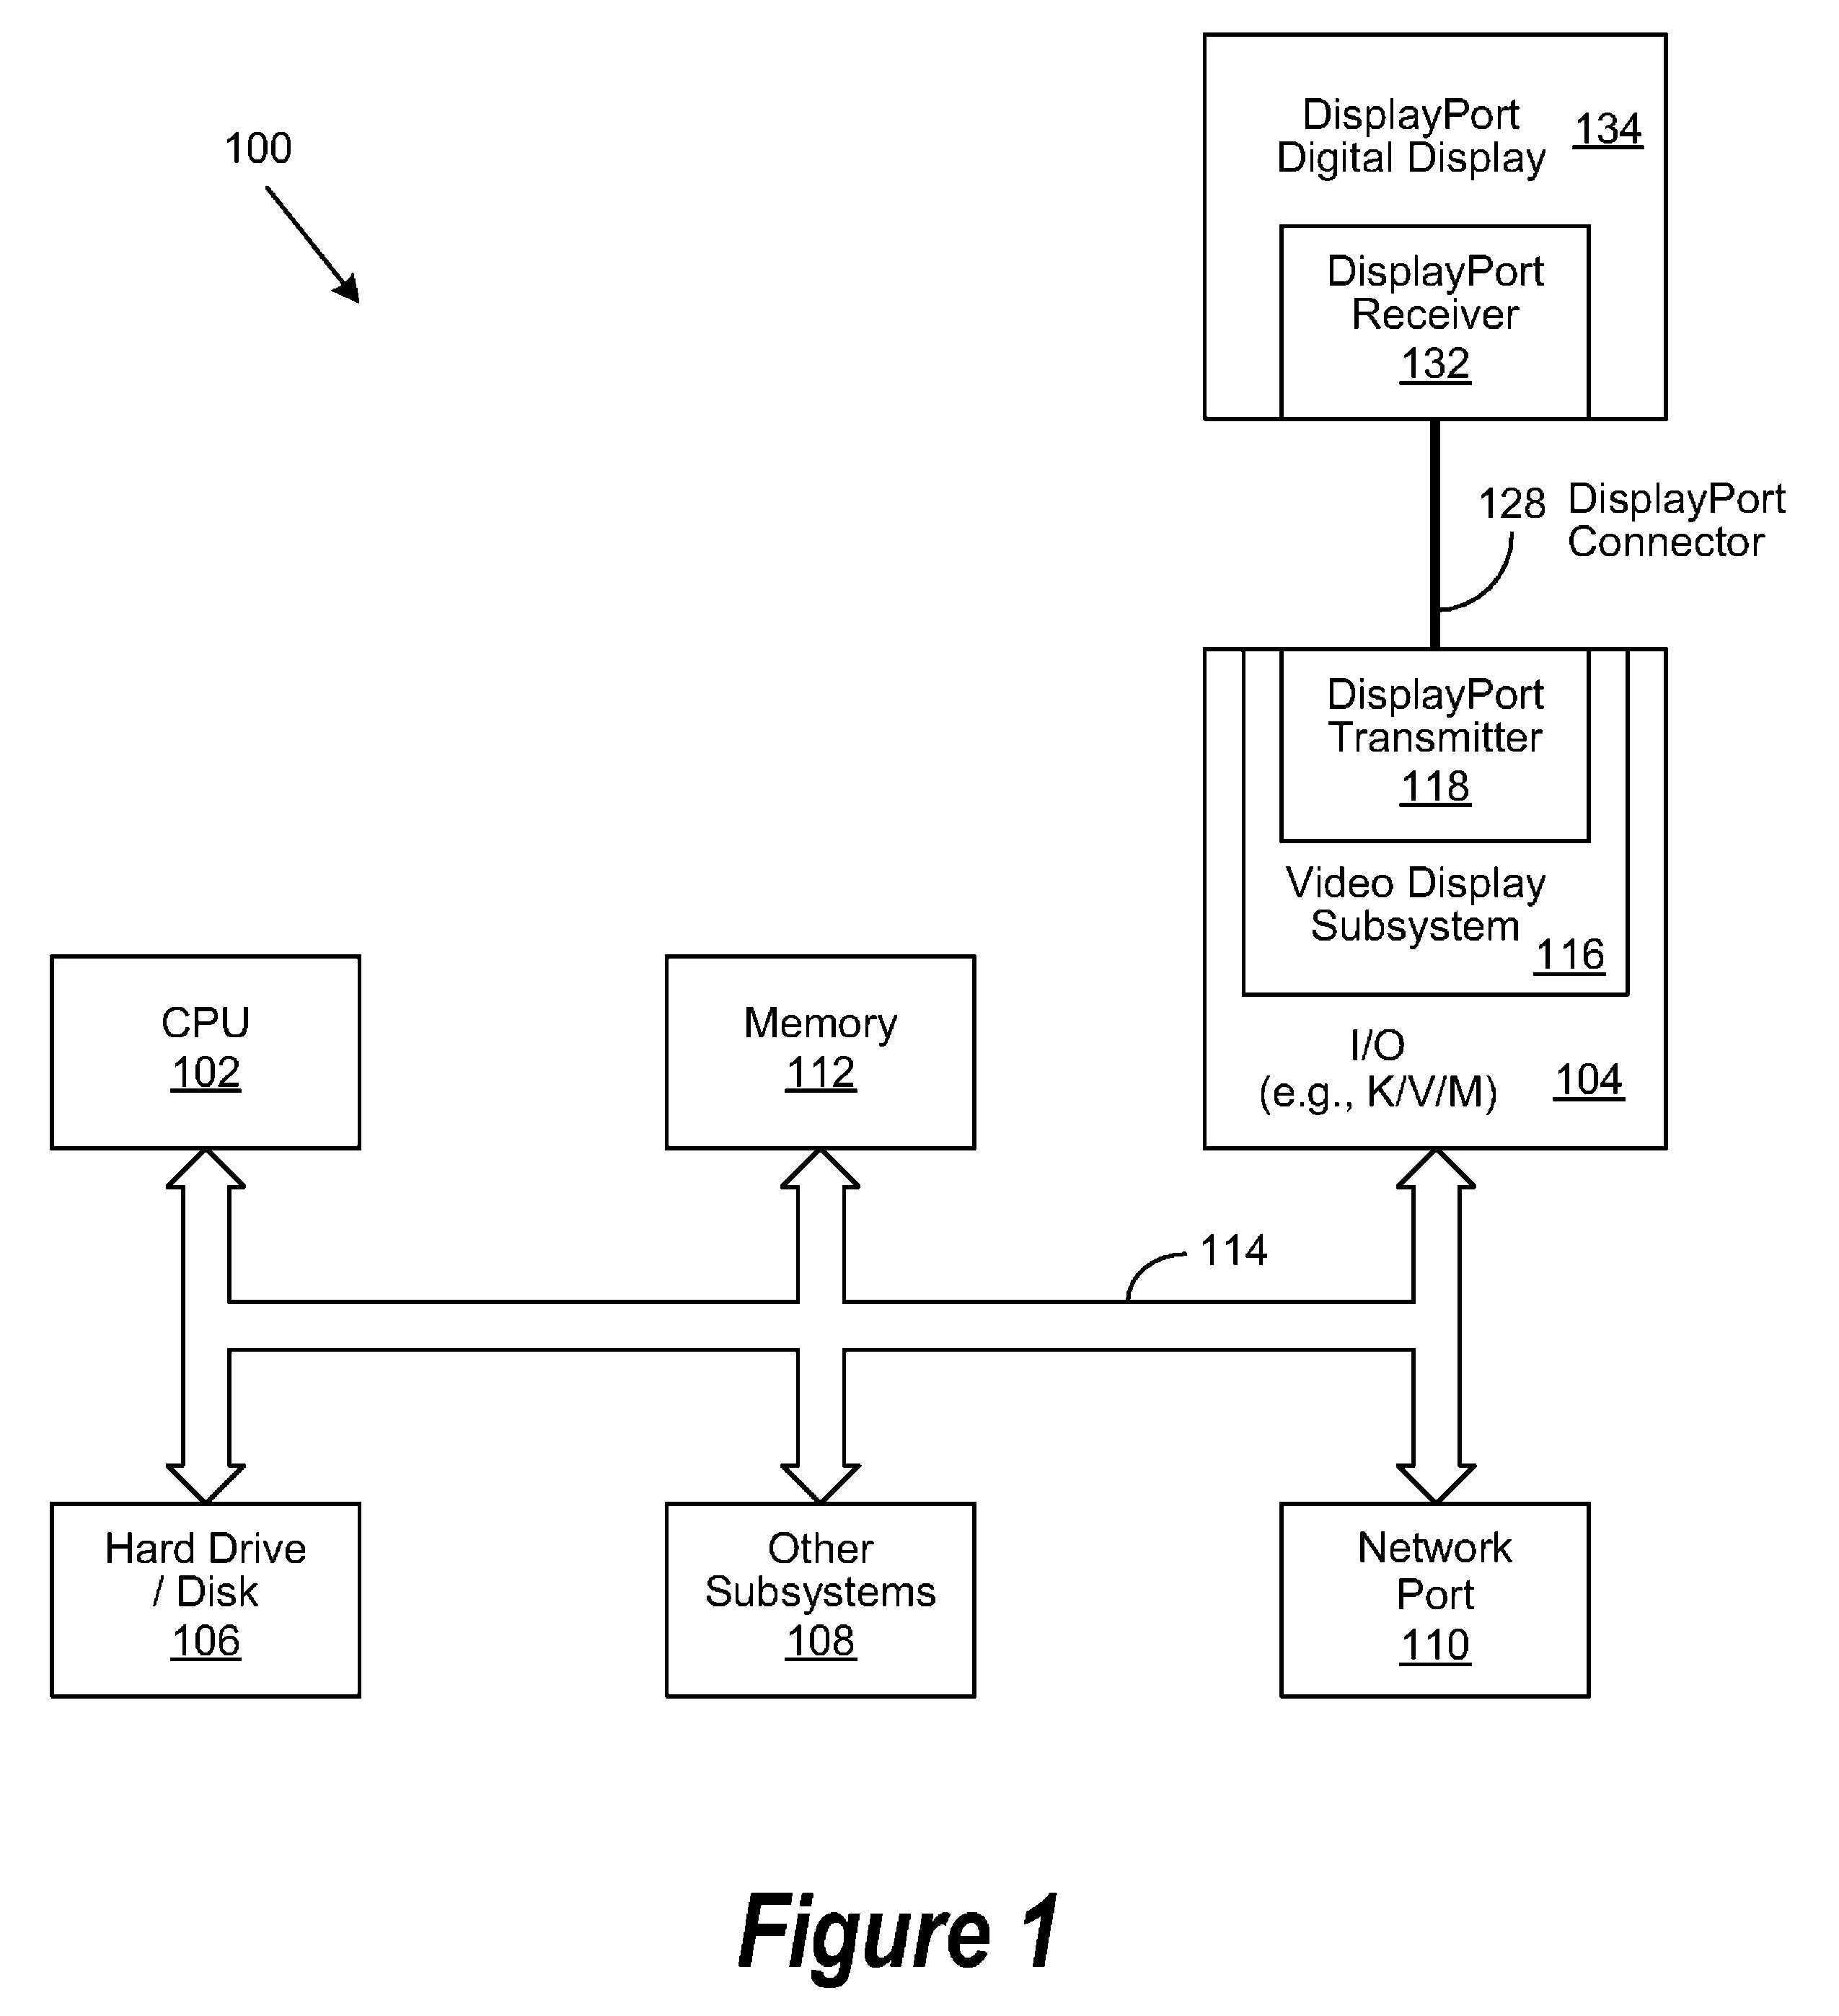 Displayport CE system control functionality